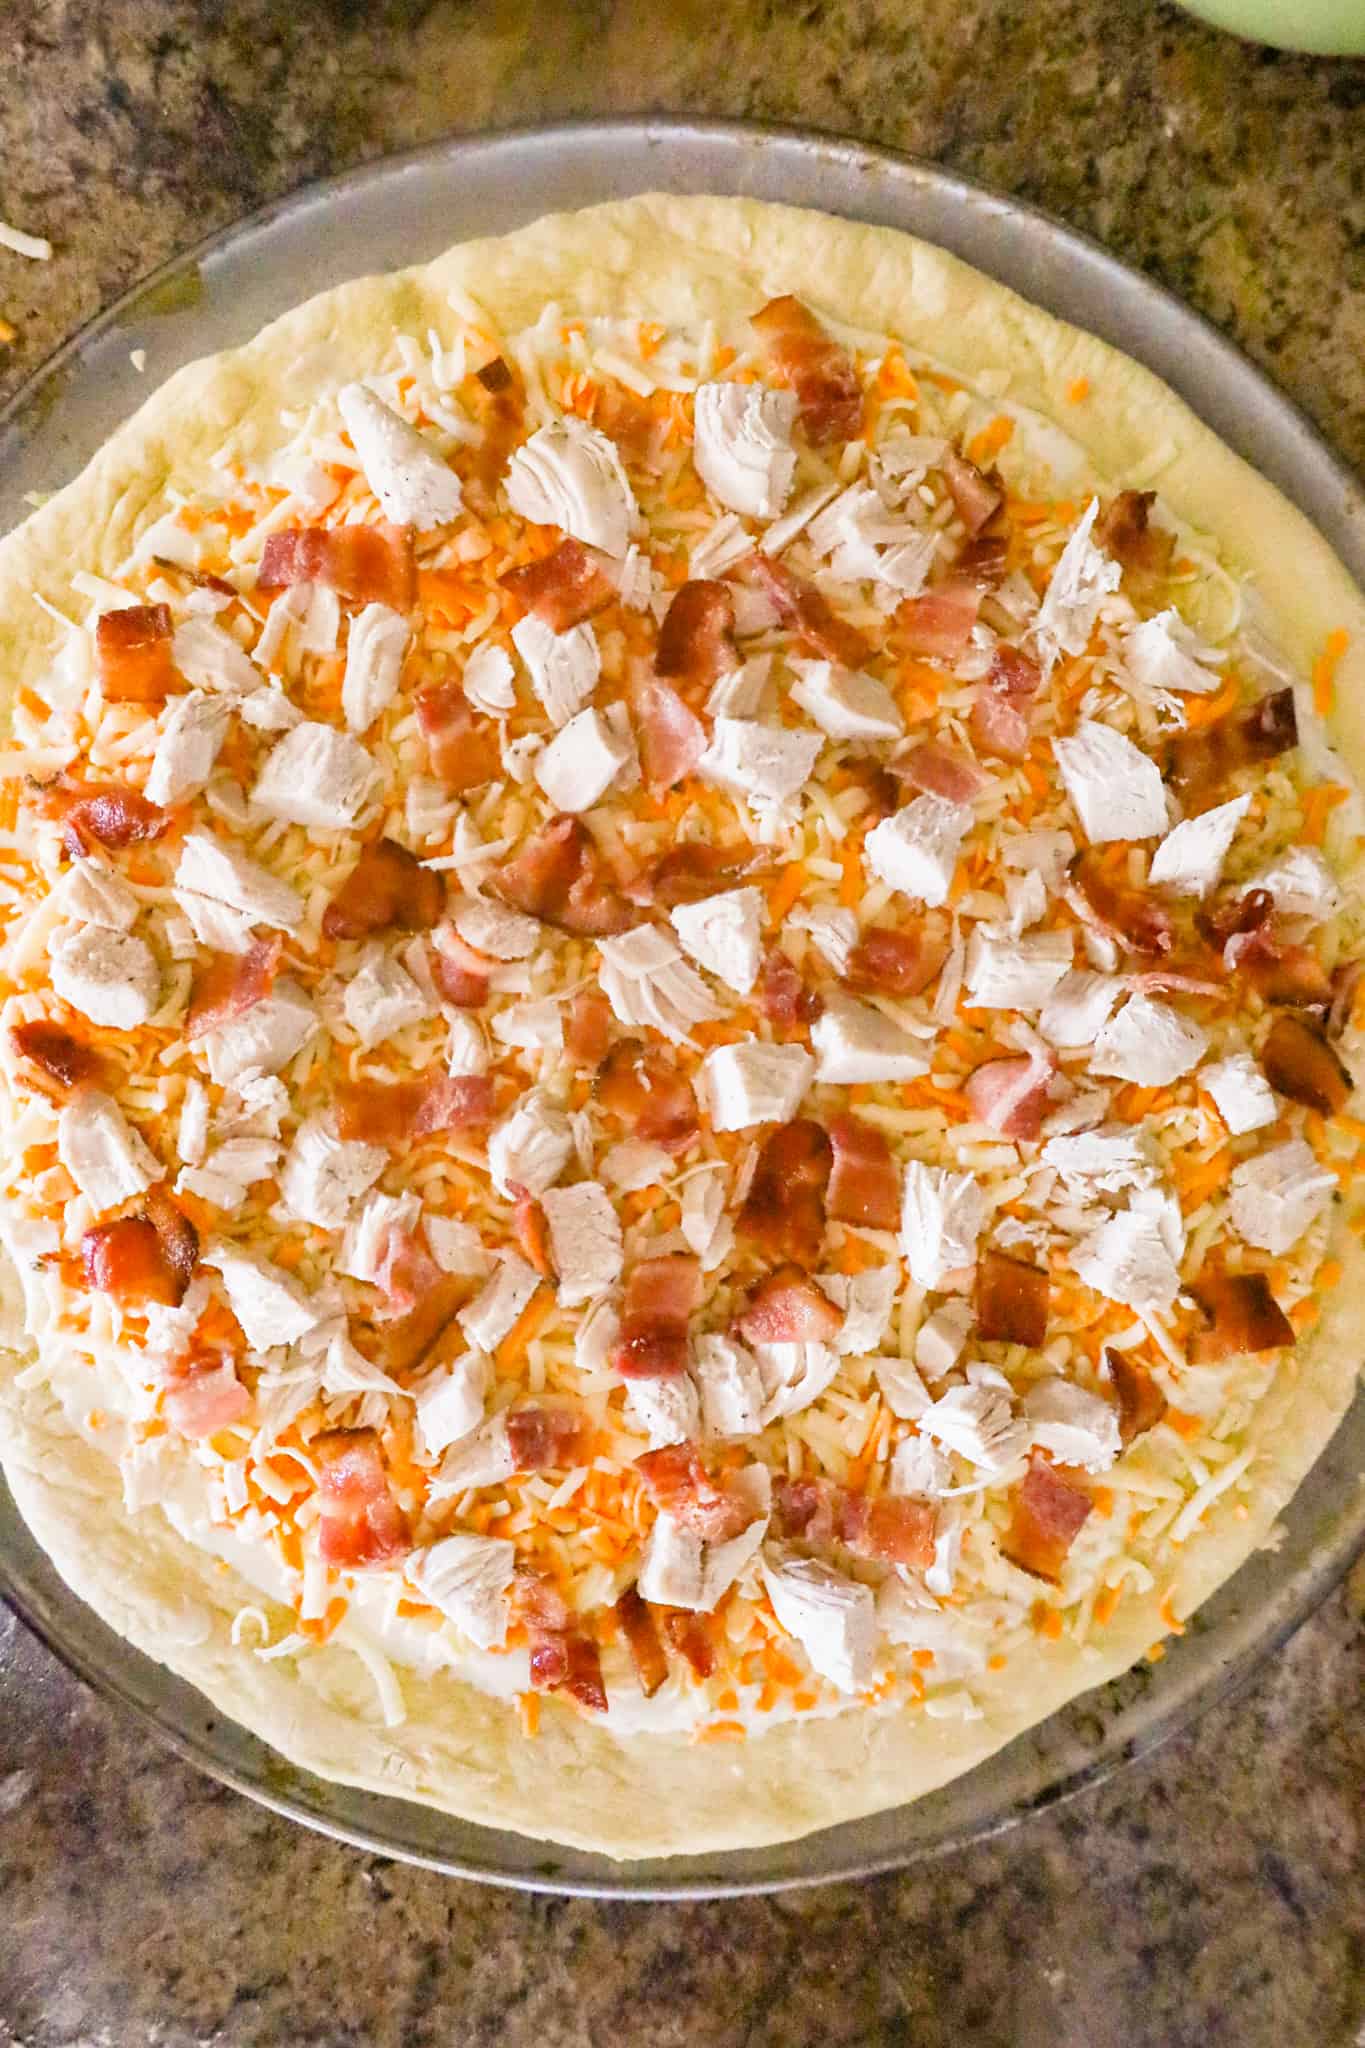 chopped bacon and chicken on top of shredded mozzarella and cheddar cheese on top of pizza dough before baking